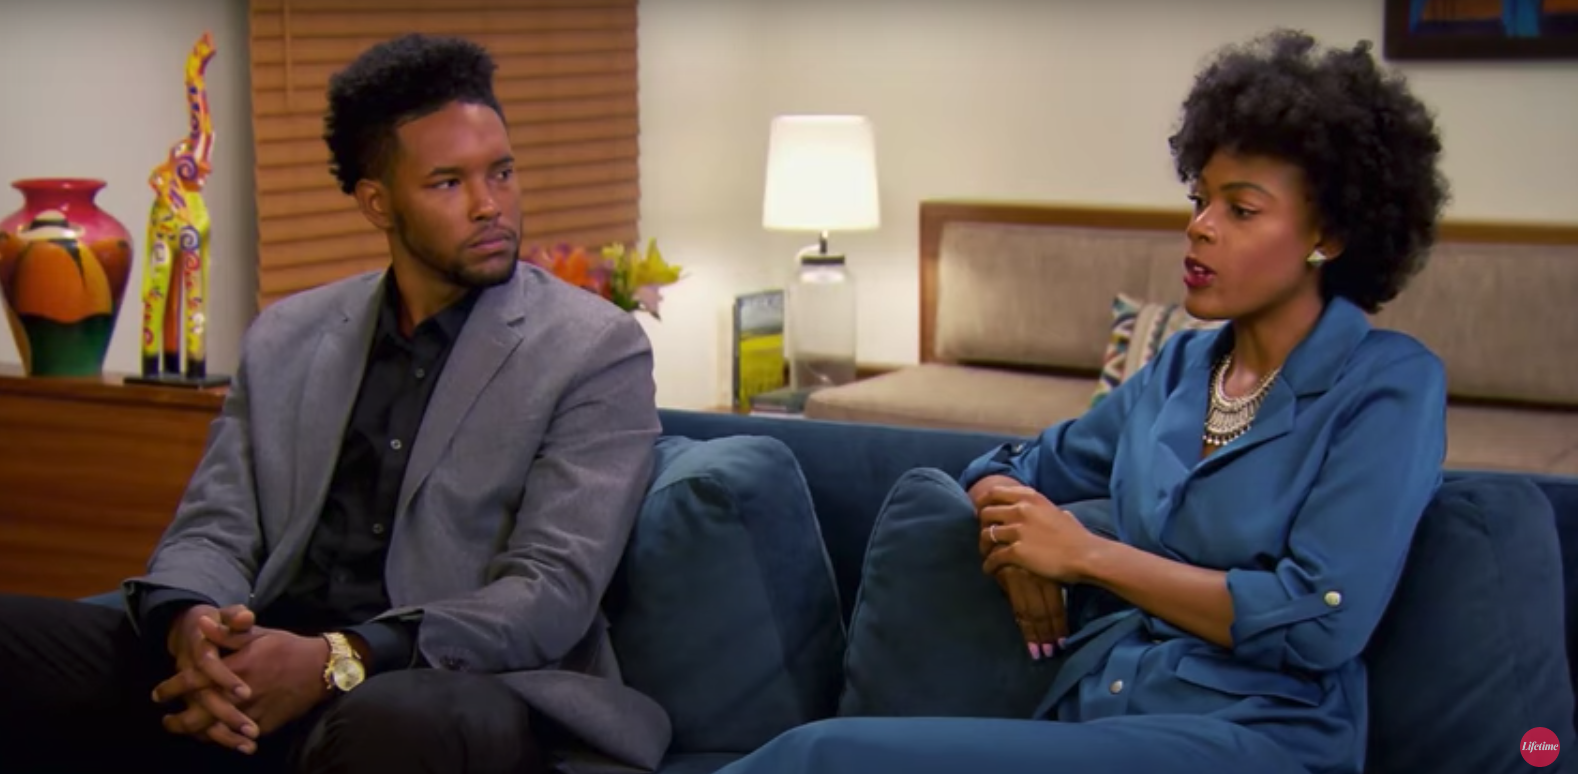 'Married at First Sight' Season 9 couple Keith and Iris sitting on a couch